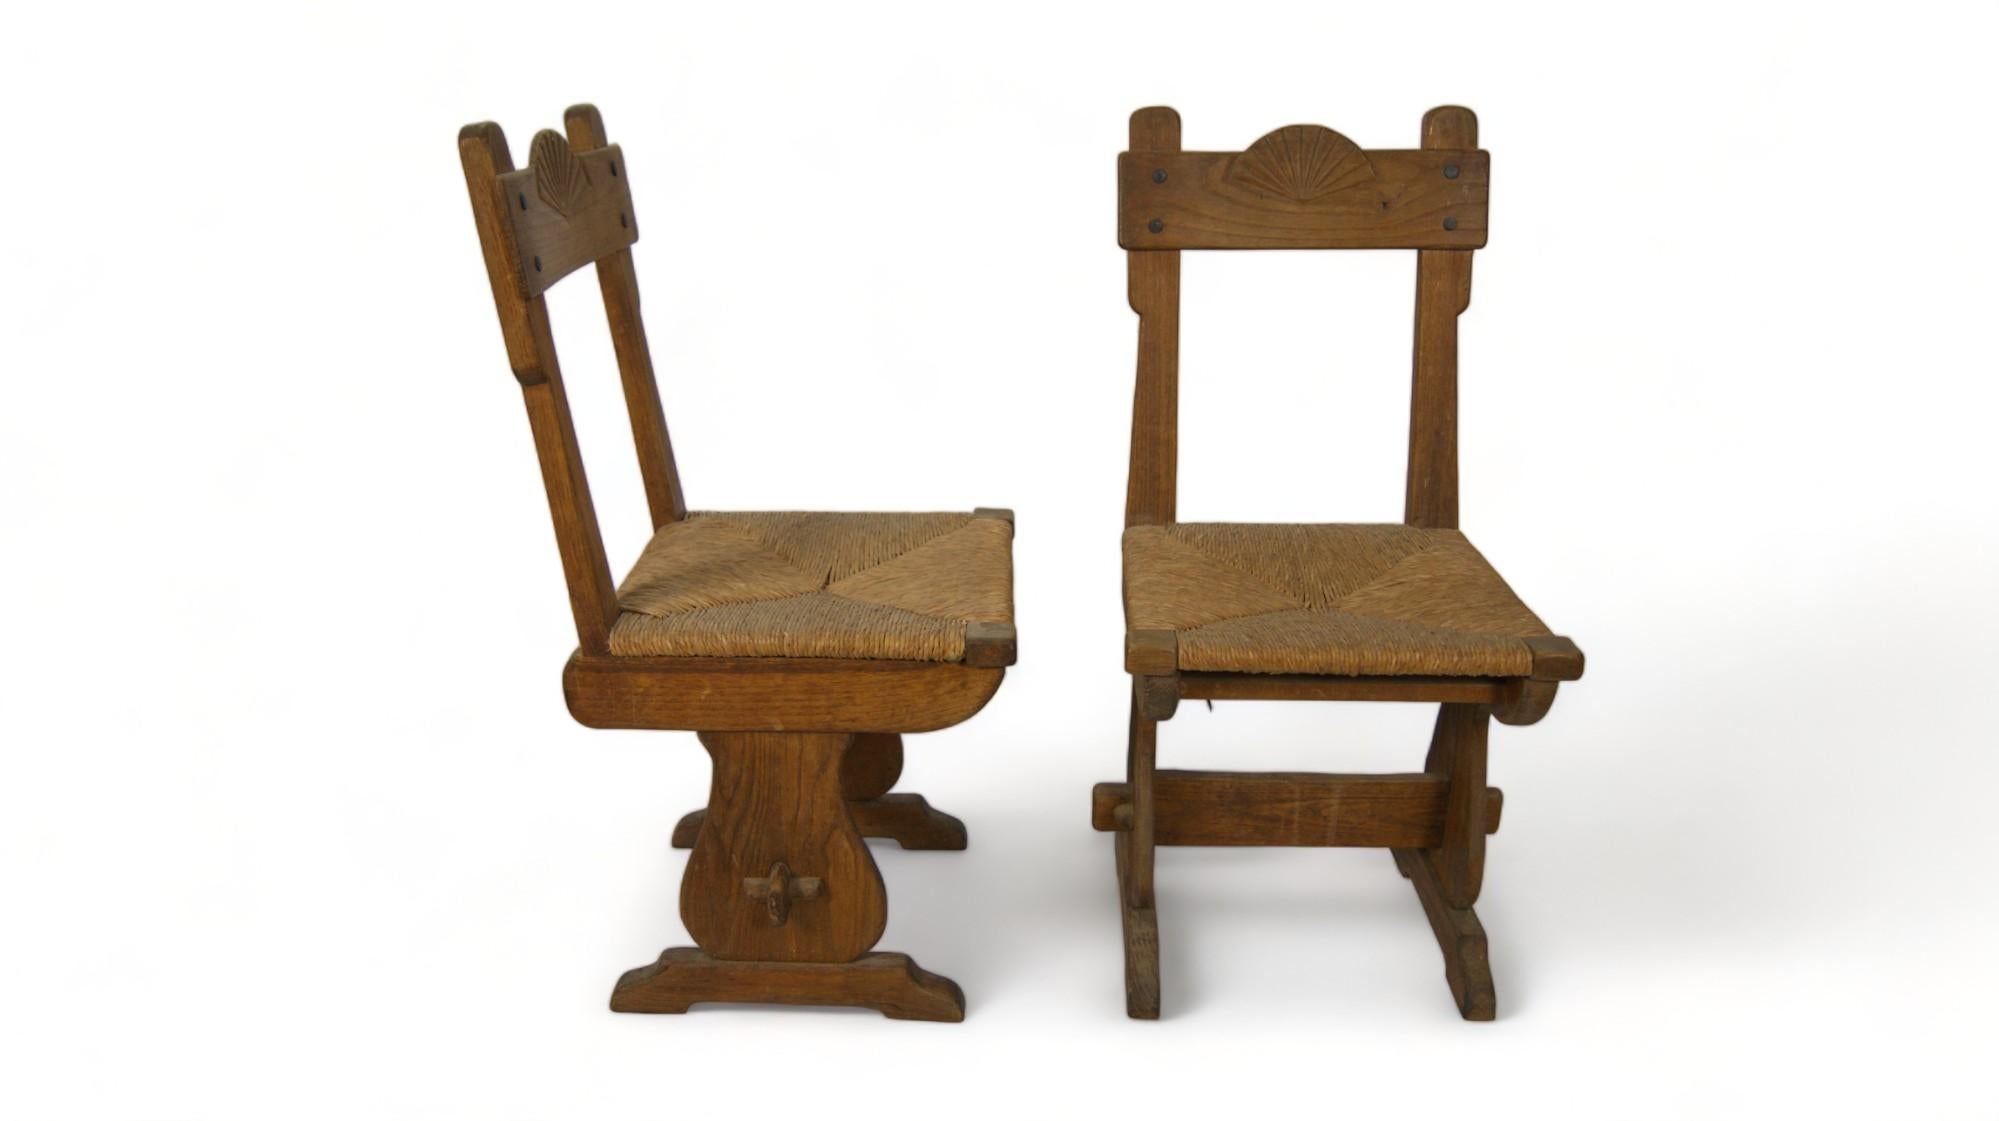 The rustic chair from the early 19th century, with a hand-carved shell, is a charming piece that evokes the simplicity and craftsmanship of the era. This chair, anchored in the charm of rustic tradition, reflects the skill and manual care that